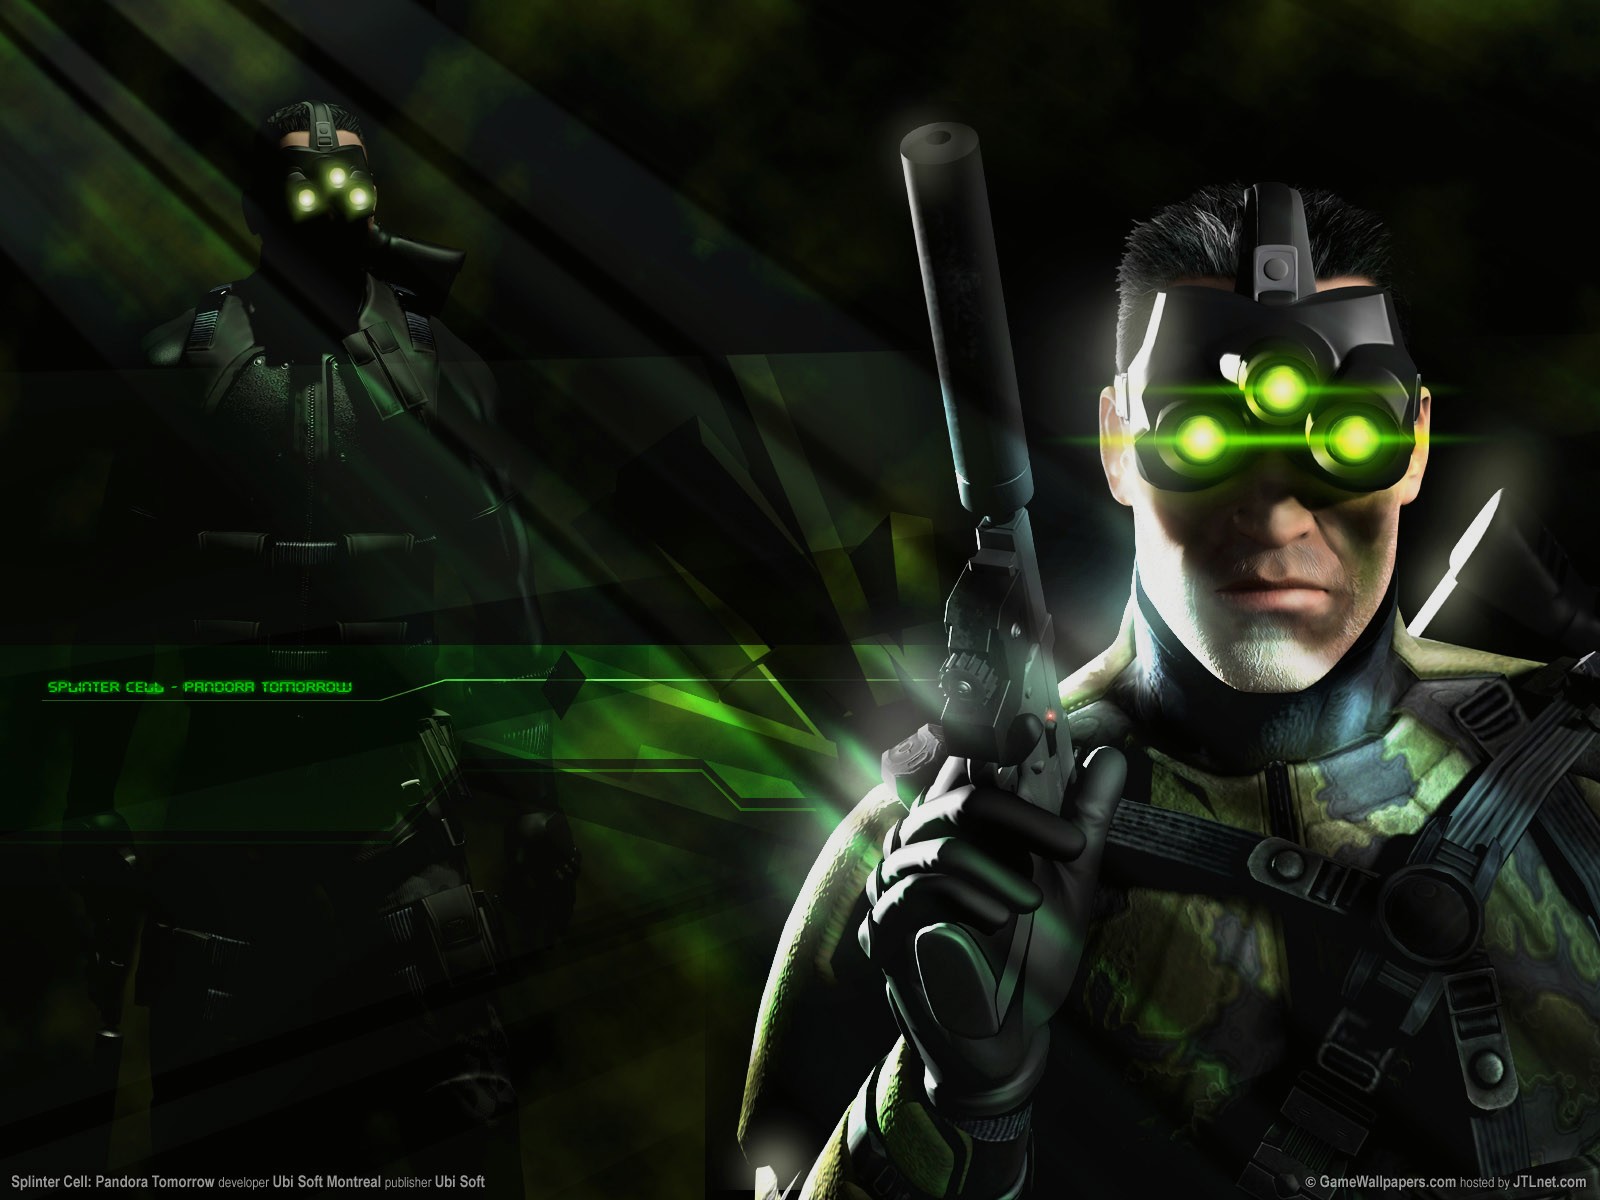 Tom Clancy's Splinter Cell: Conviction Wallpapers